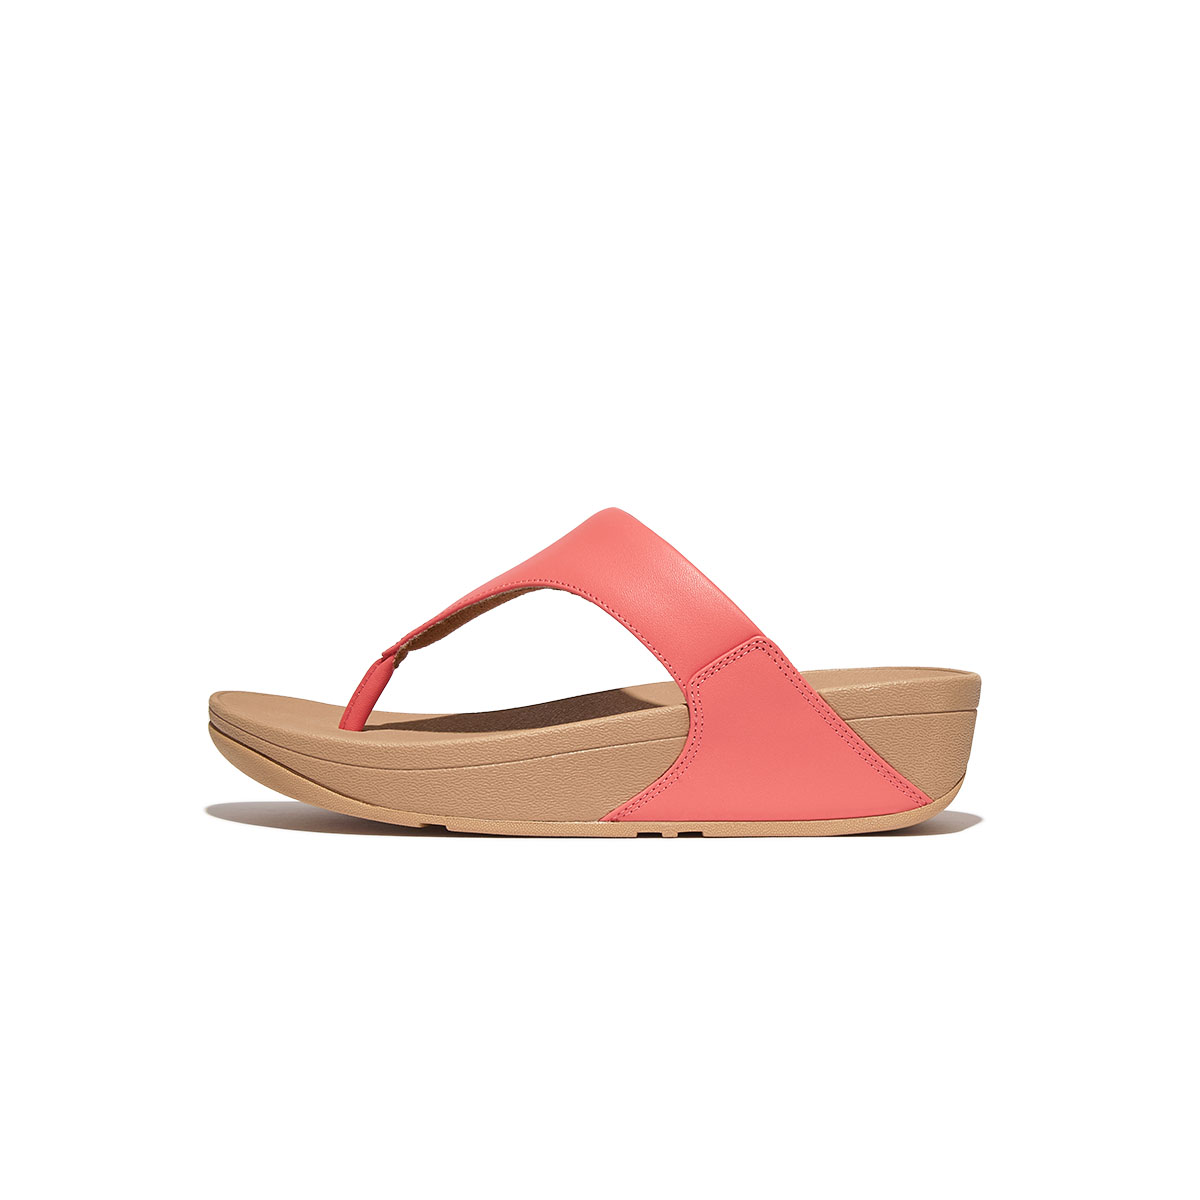 LULU Leather Toe-Post Sandals - Rosy Coral (I88-B09) | FitFlop Malaysia